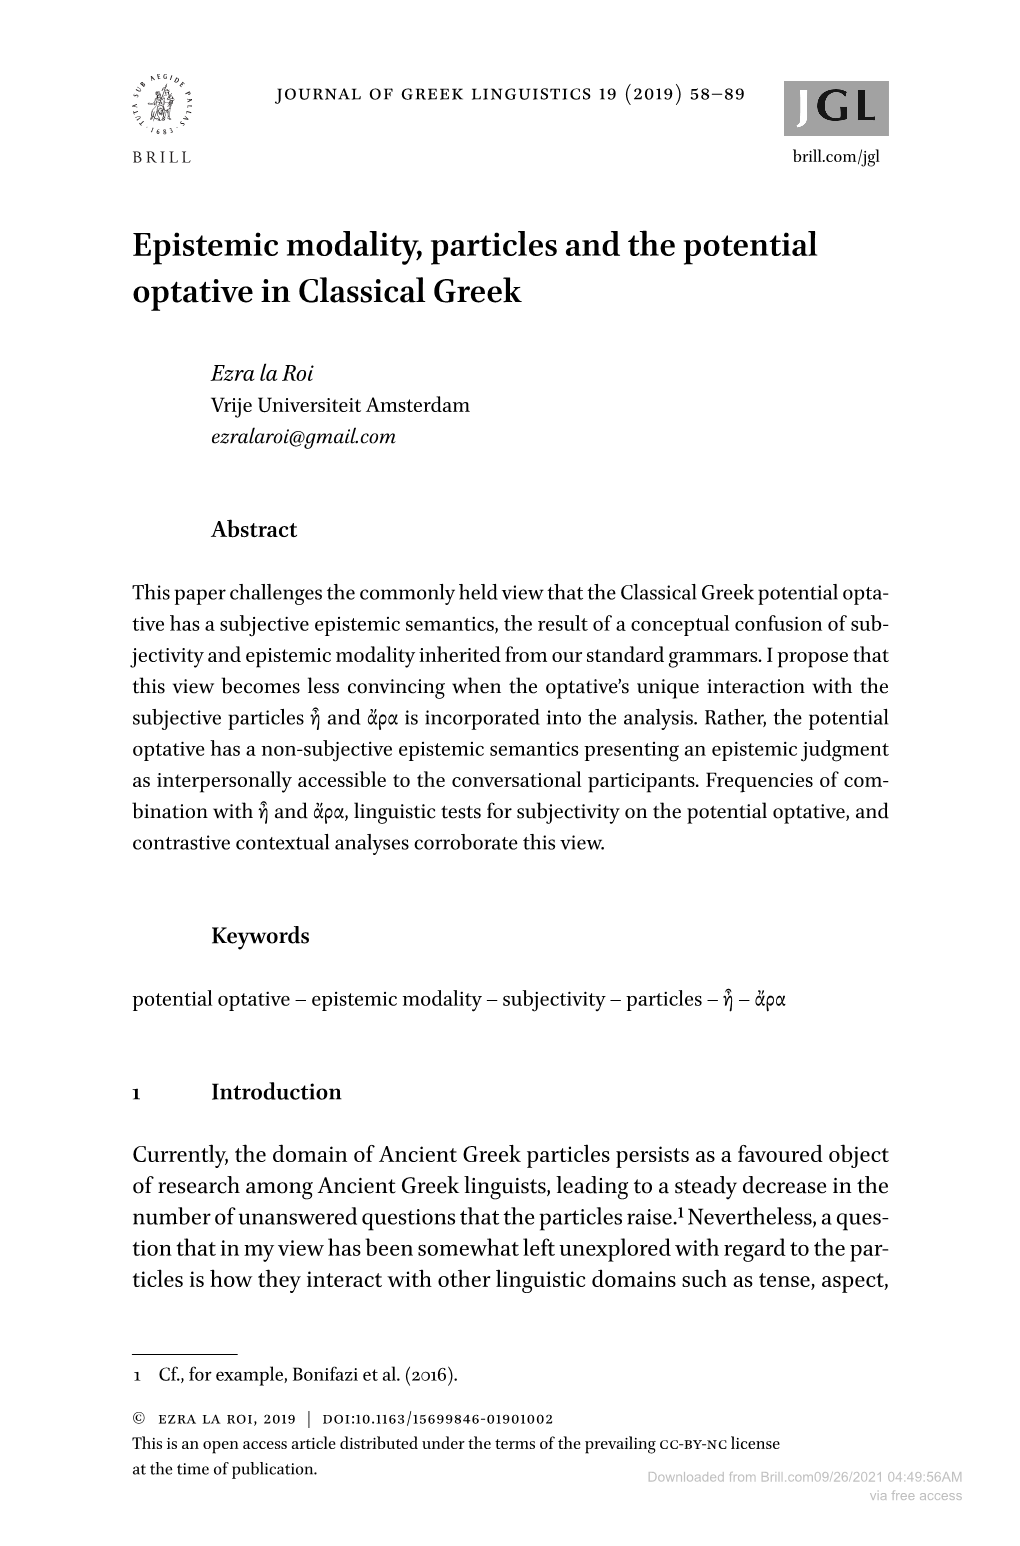 Epistemic Modality, Particles and the Potential Optative in Classical Greek